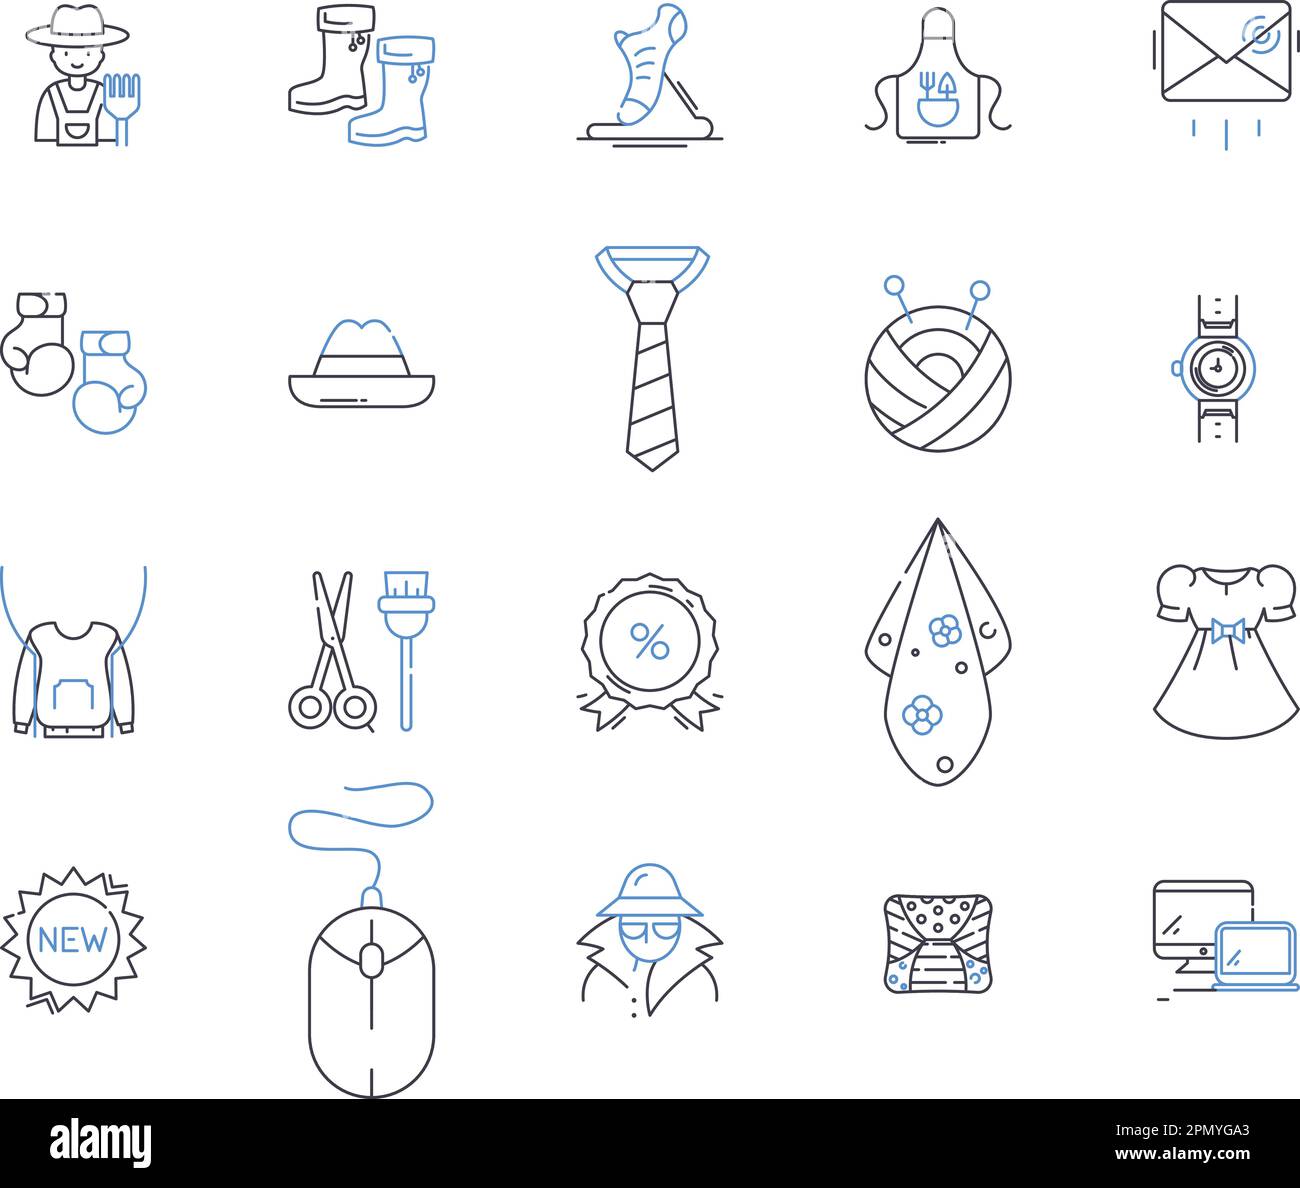 Merchandising outline icons collection. Merchandise, Retail, Selling, Marketing, Promotion, Advertising, Store vector and illustration concept set Stock Vector